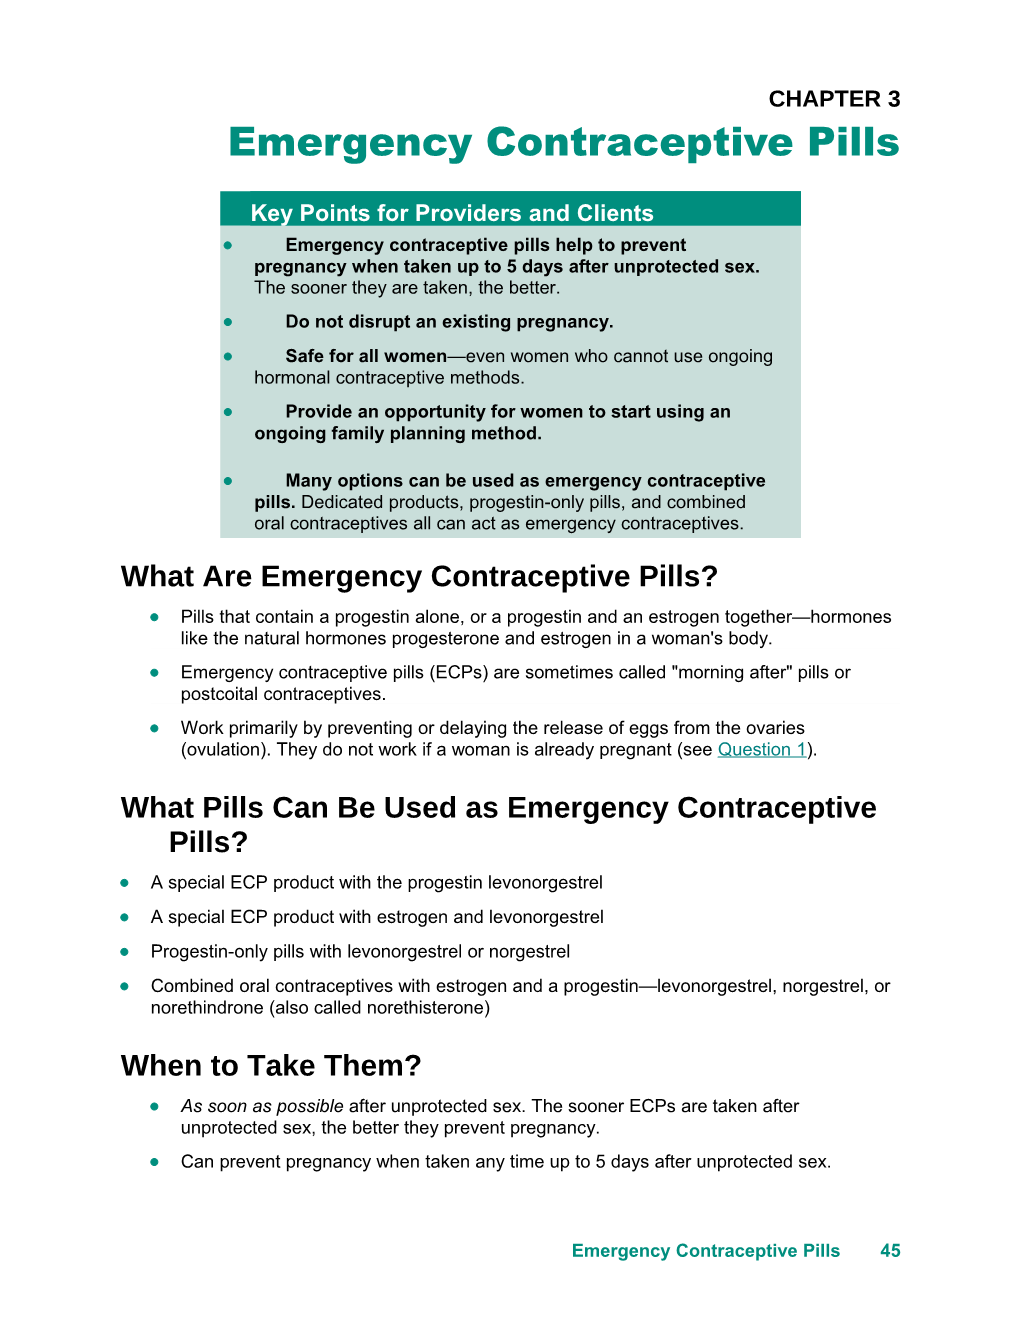 What Are Emergency Contraceptive Pills?